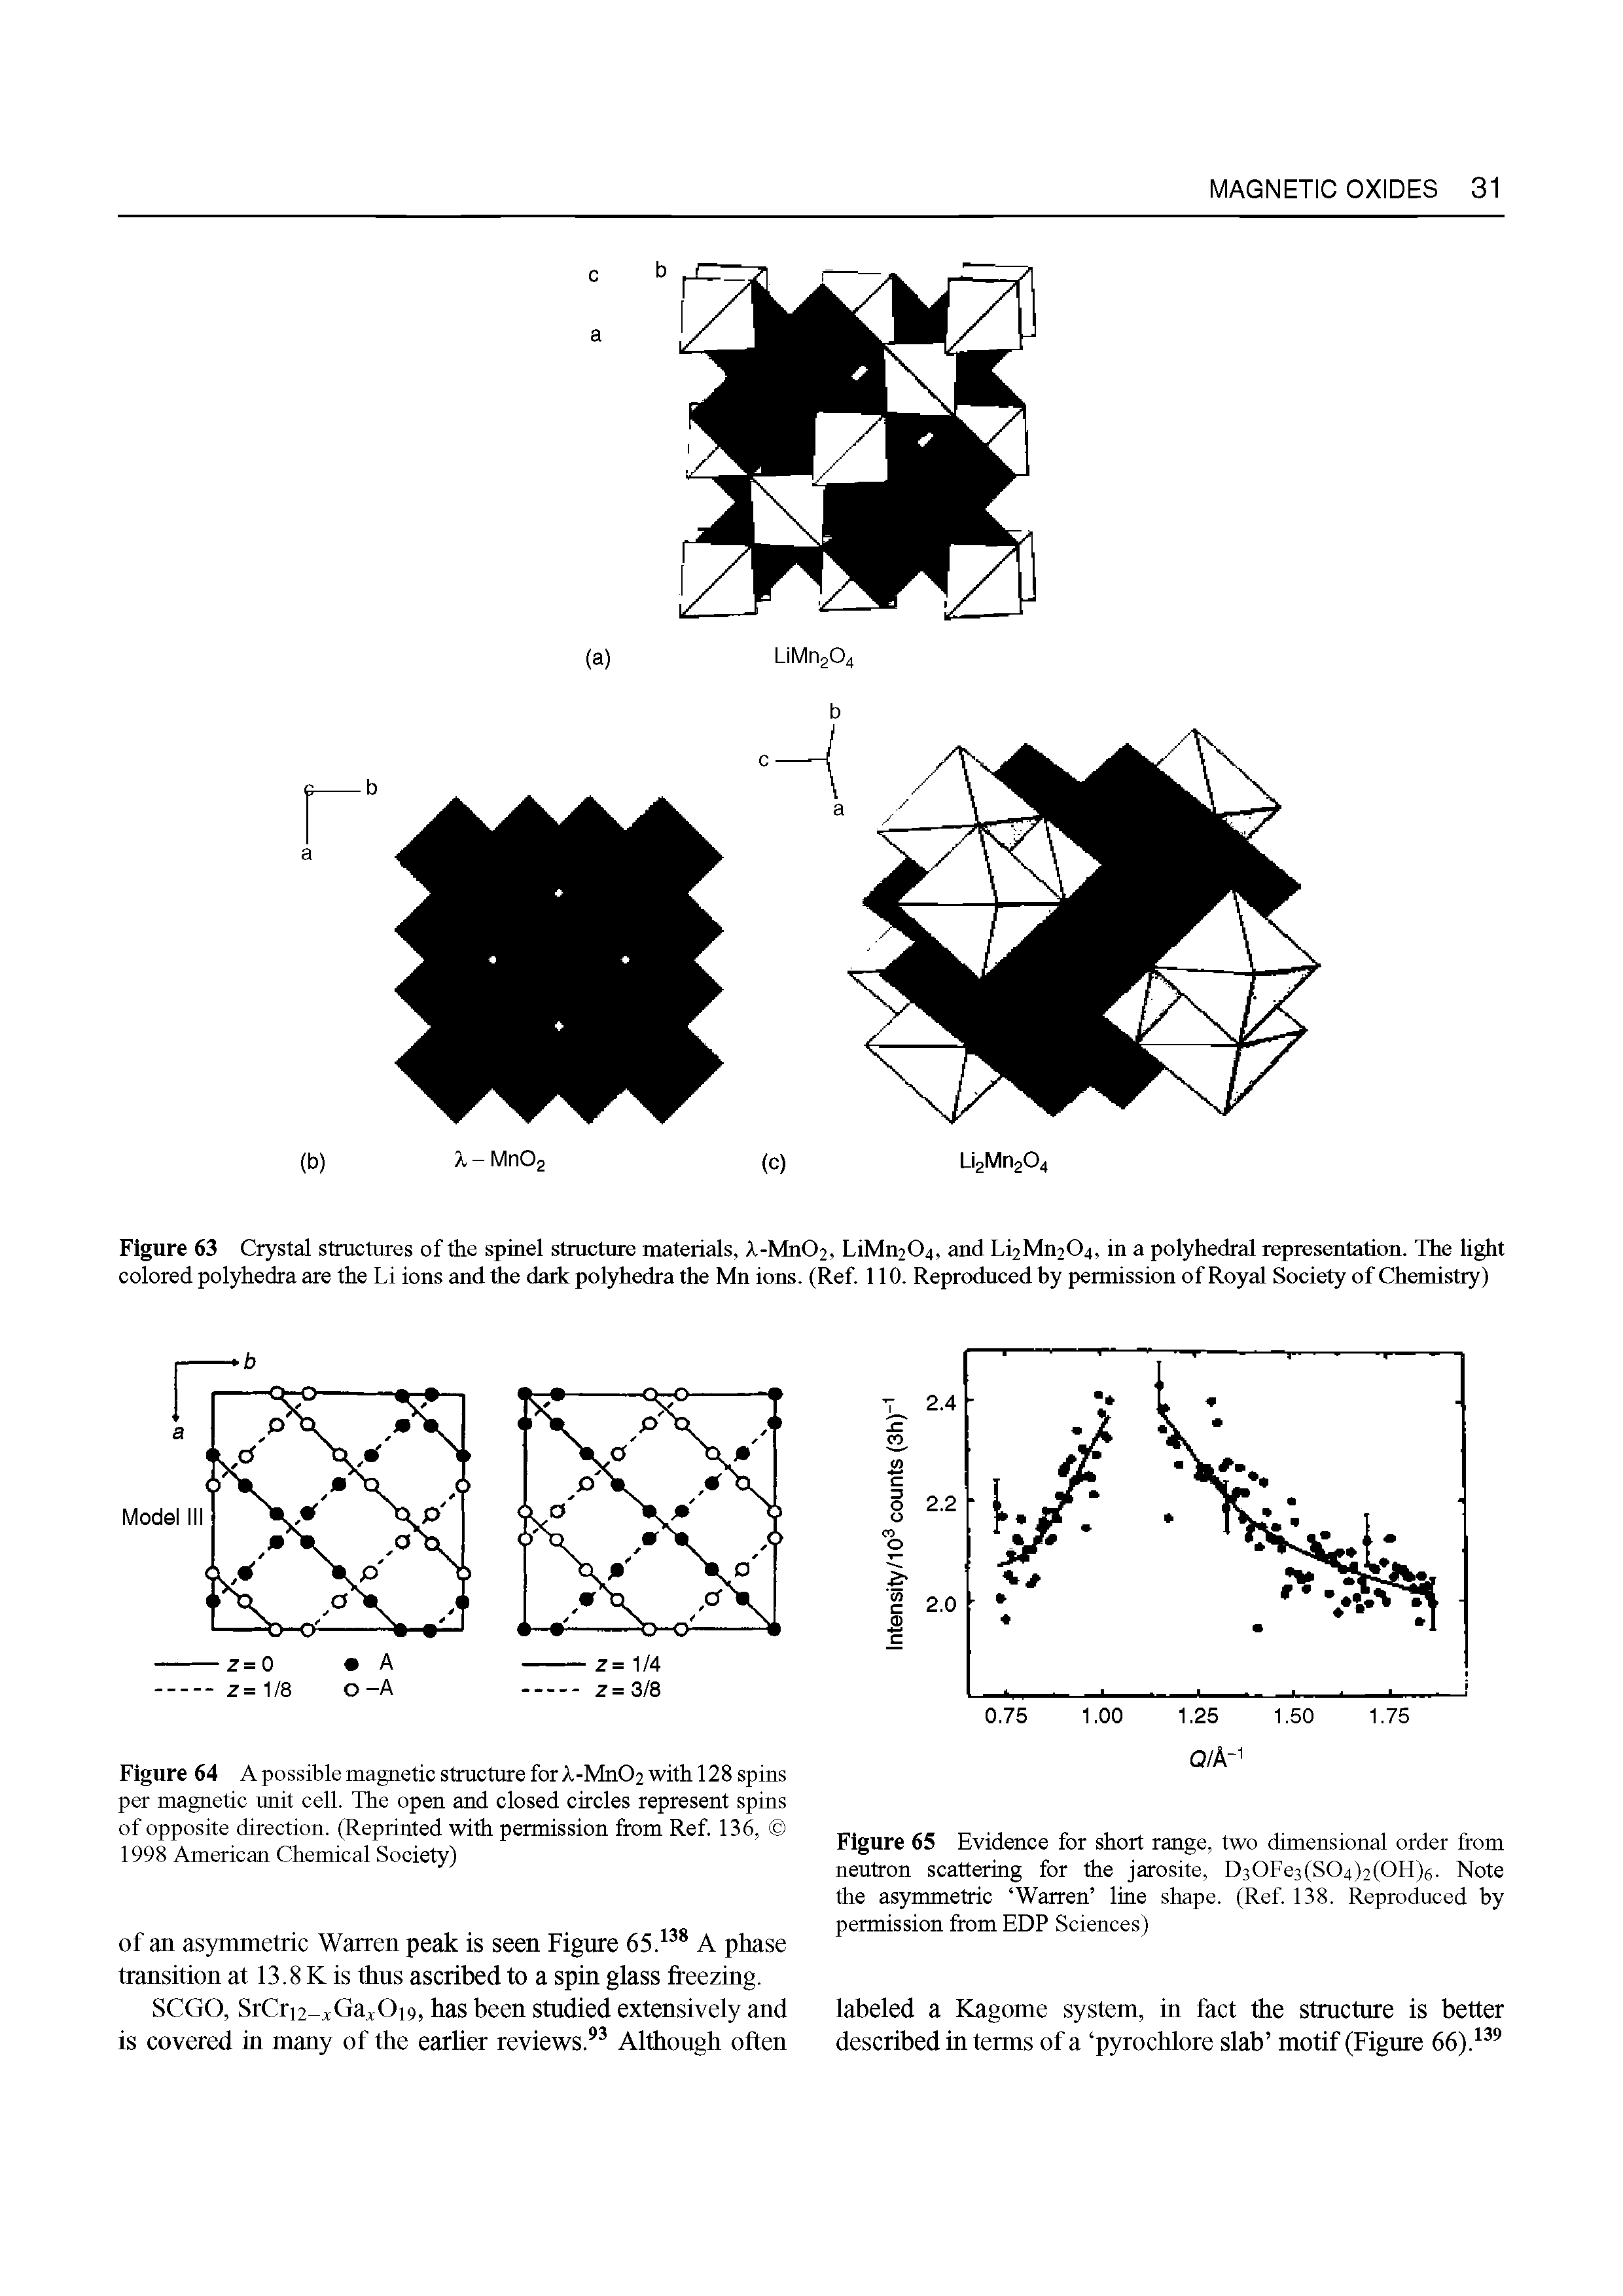 Figure 63 Crystal structures of the spinel structure materials, X-Mn02, LiMn204, and Li2Mu204, in a polyhedral representation. The light colored polyhedra are the Li ions and the dark polyhedra the Mn ions. (Ref. 110. Reproduced by permission of Royal Society of Chemistry)...